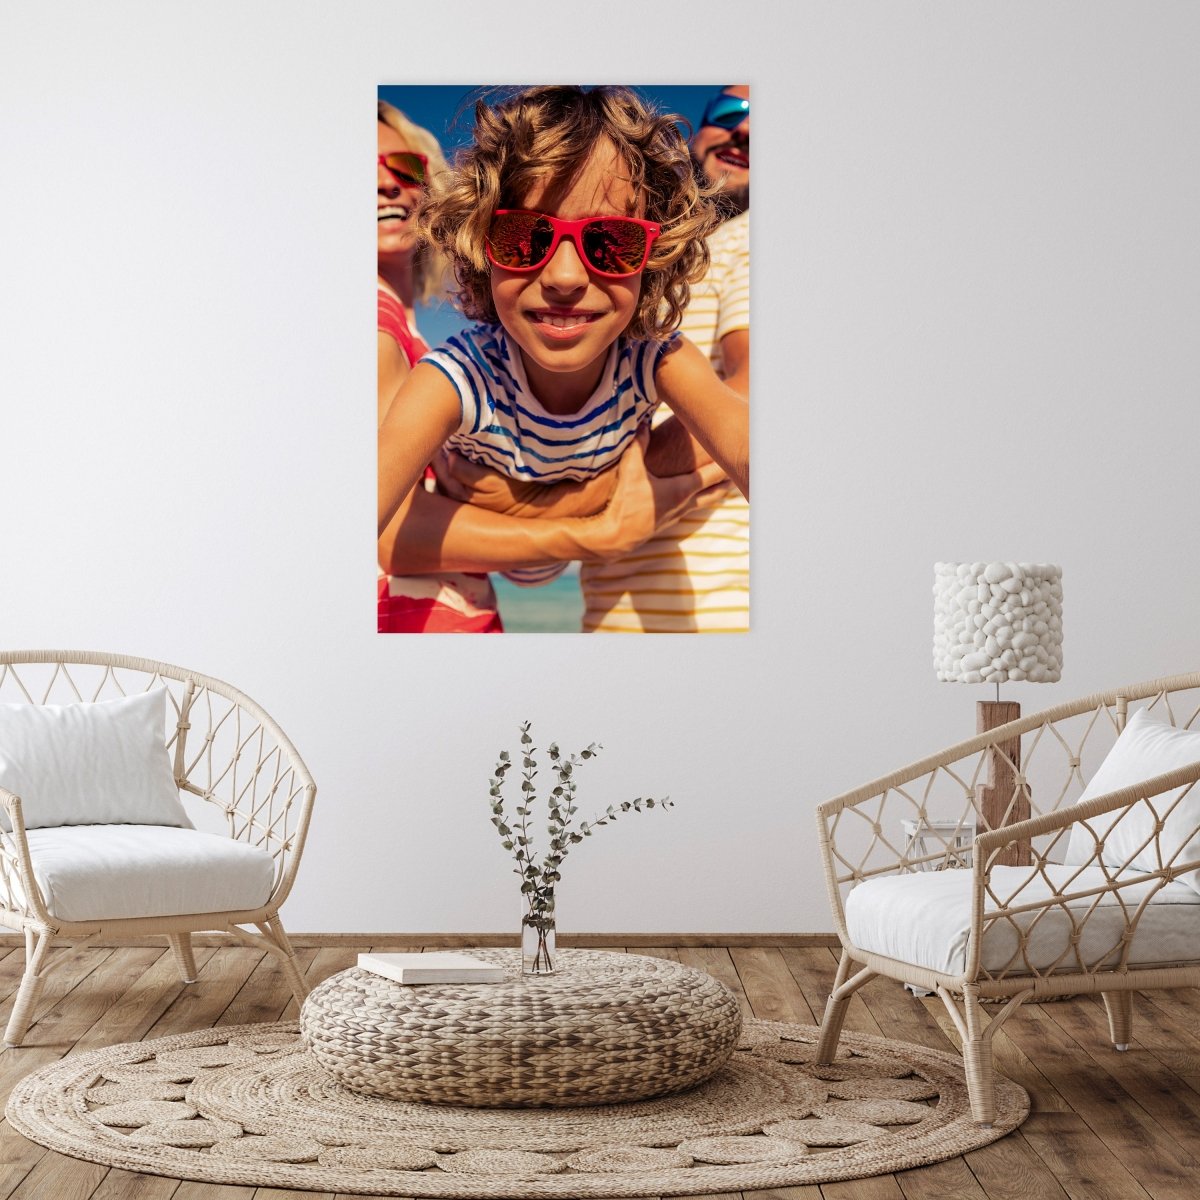 Your favorite summer moment on canvas